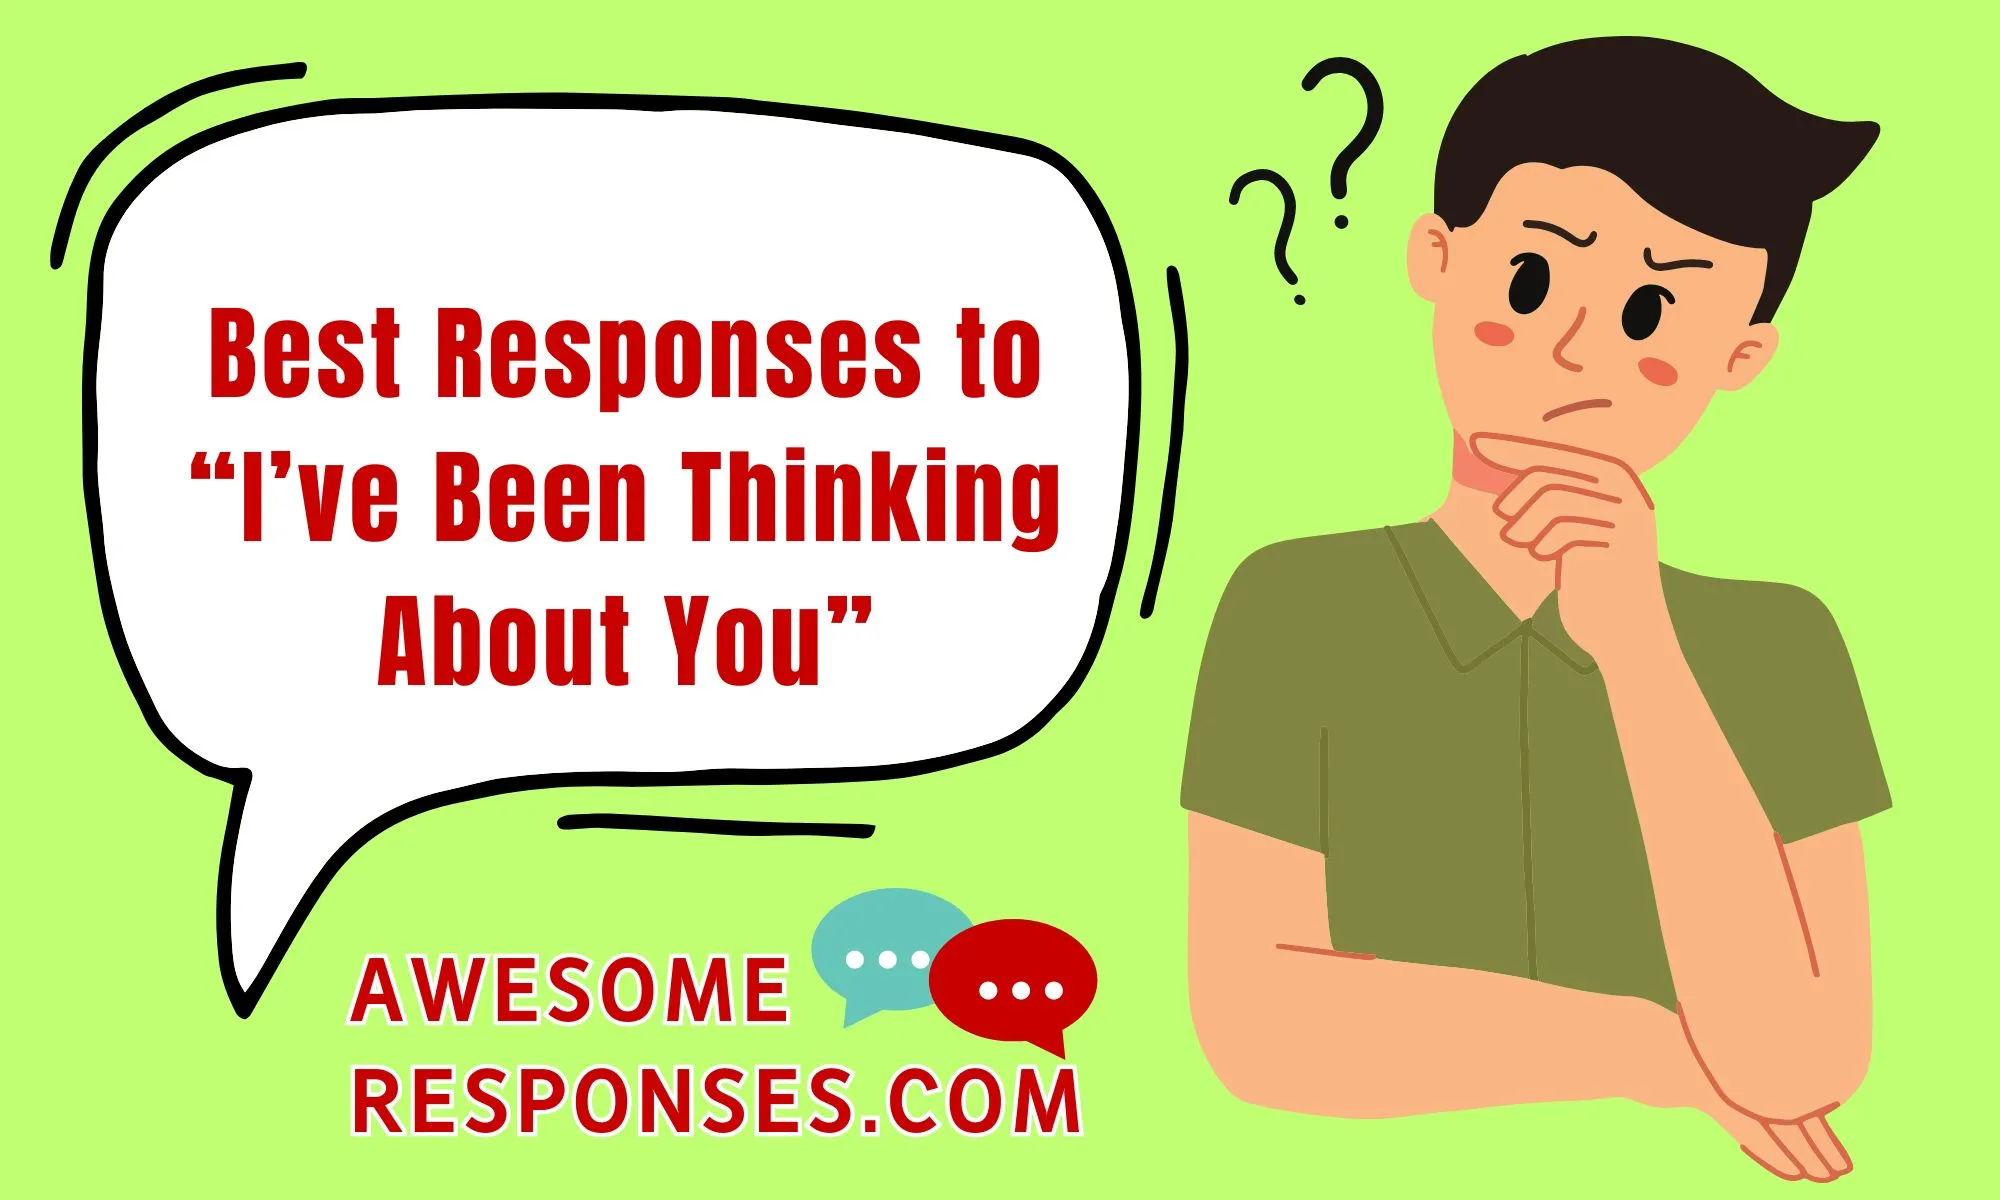 Best Responses to “I’ve Been Thinking About You”